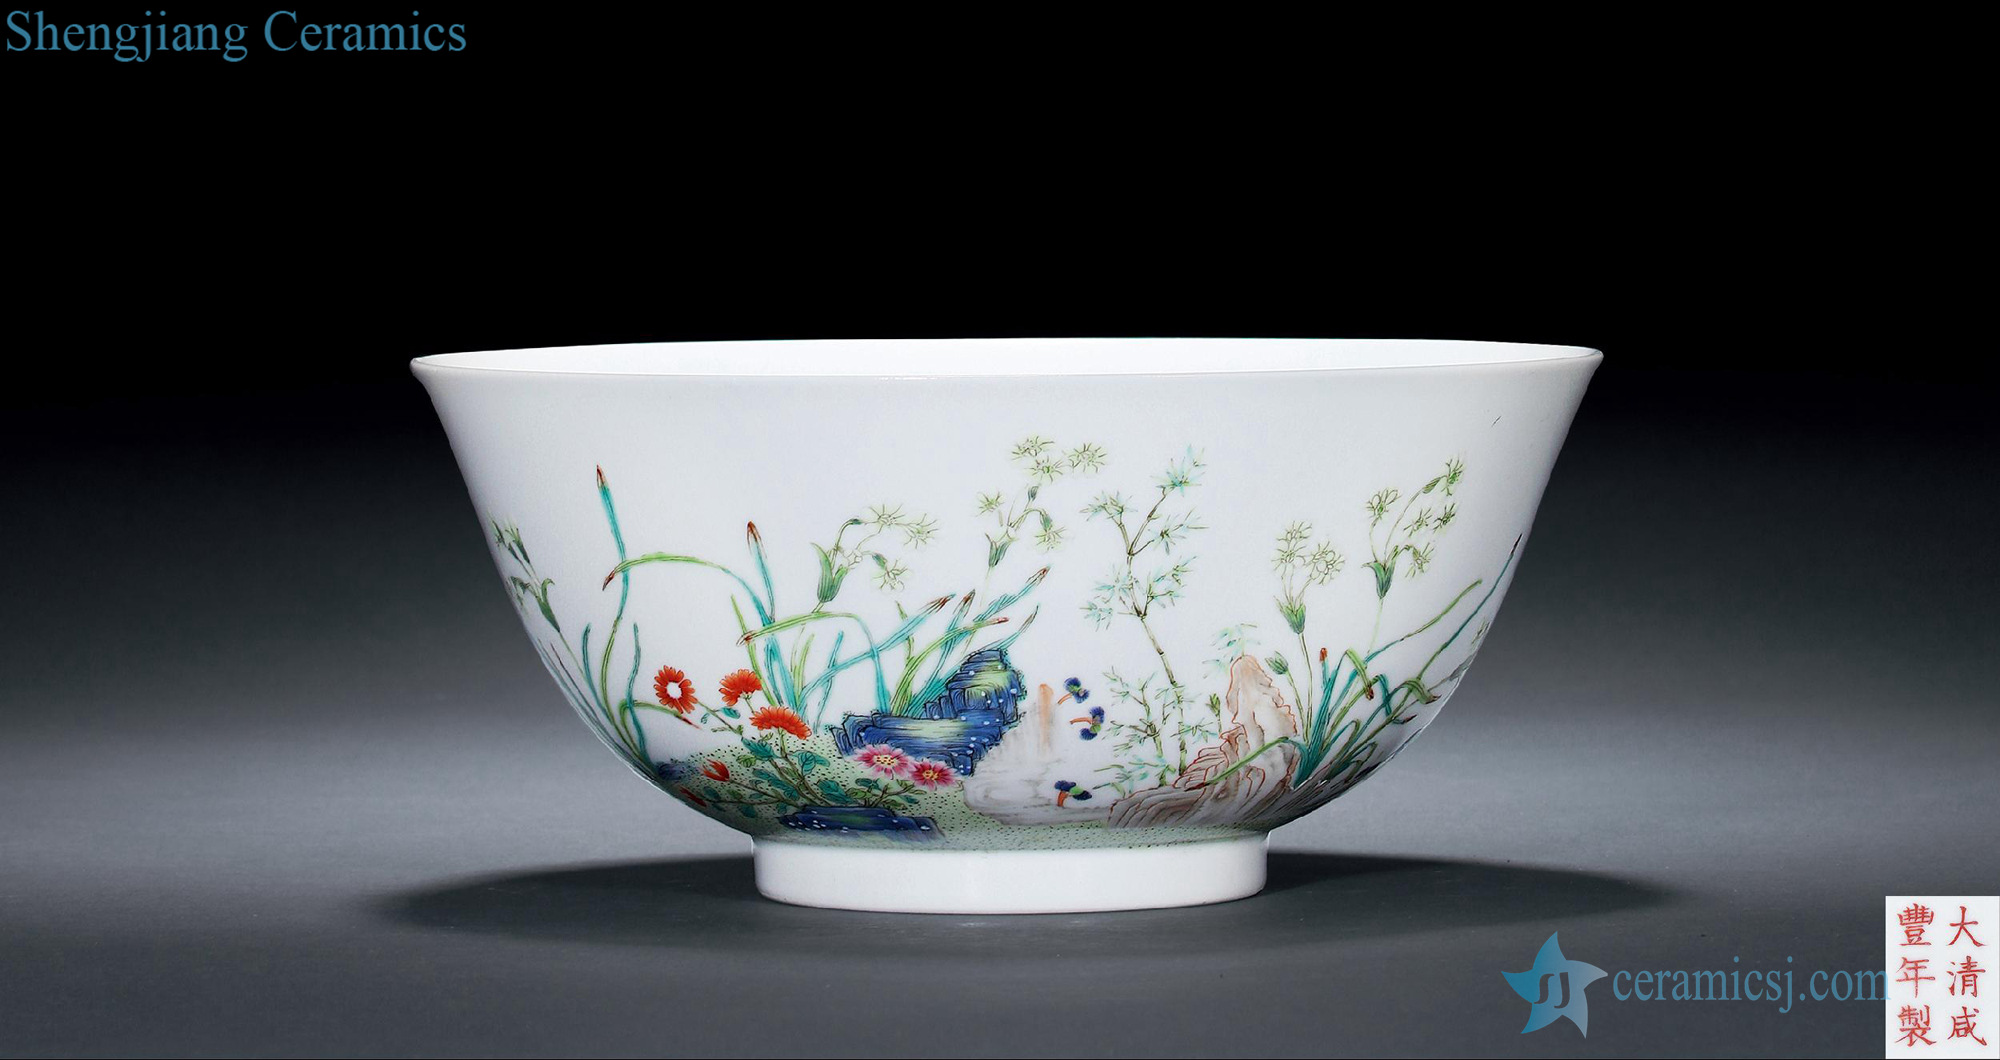 In late qing pastel four seasons flower bowls